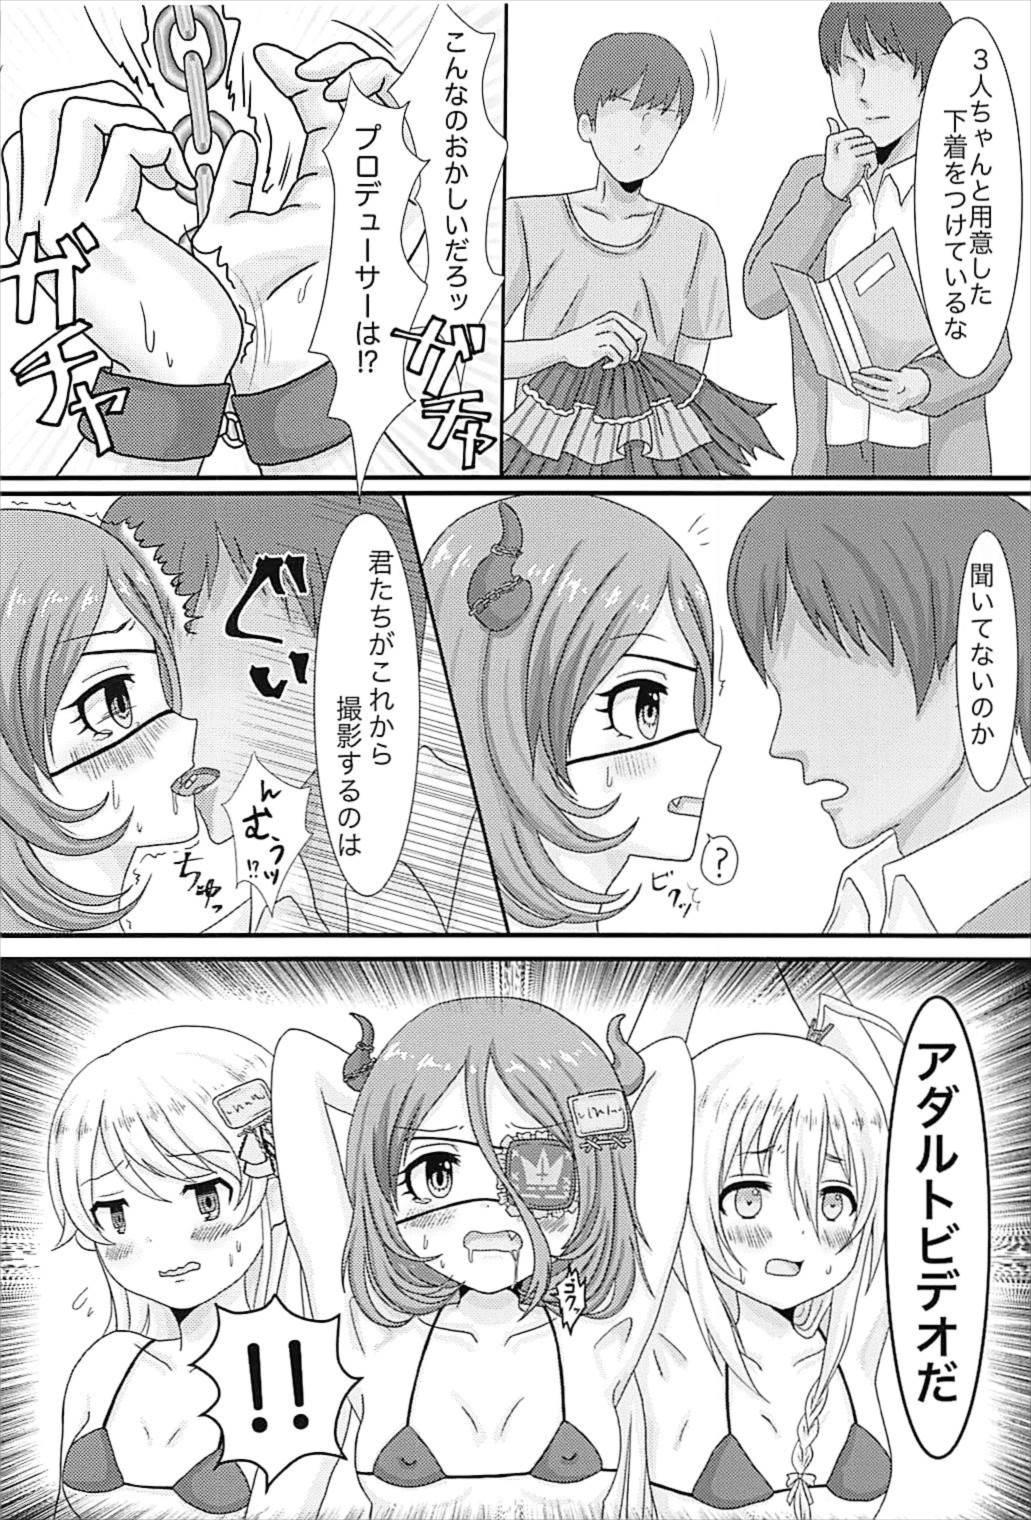 Alone individualsとエッチしたい！ - The idolmaster Milf Cougar - Page 5